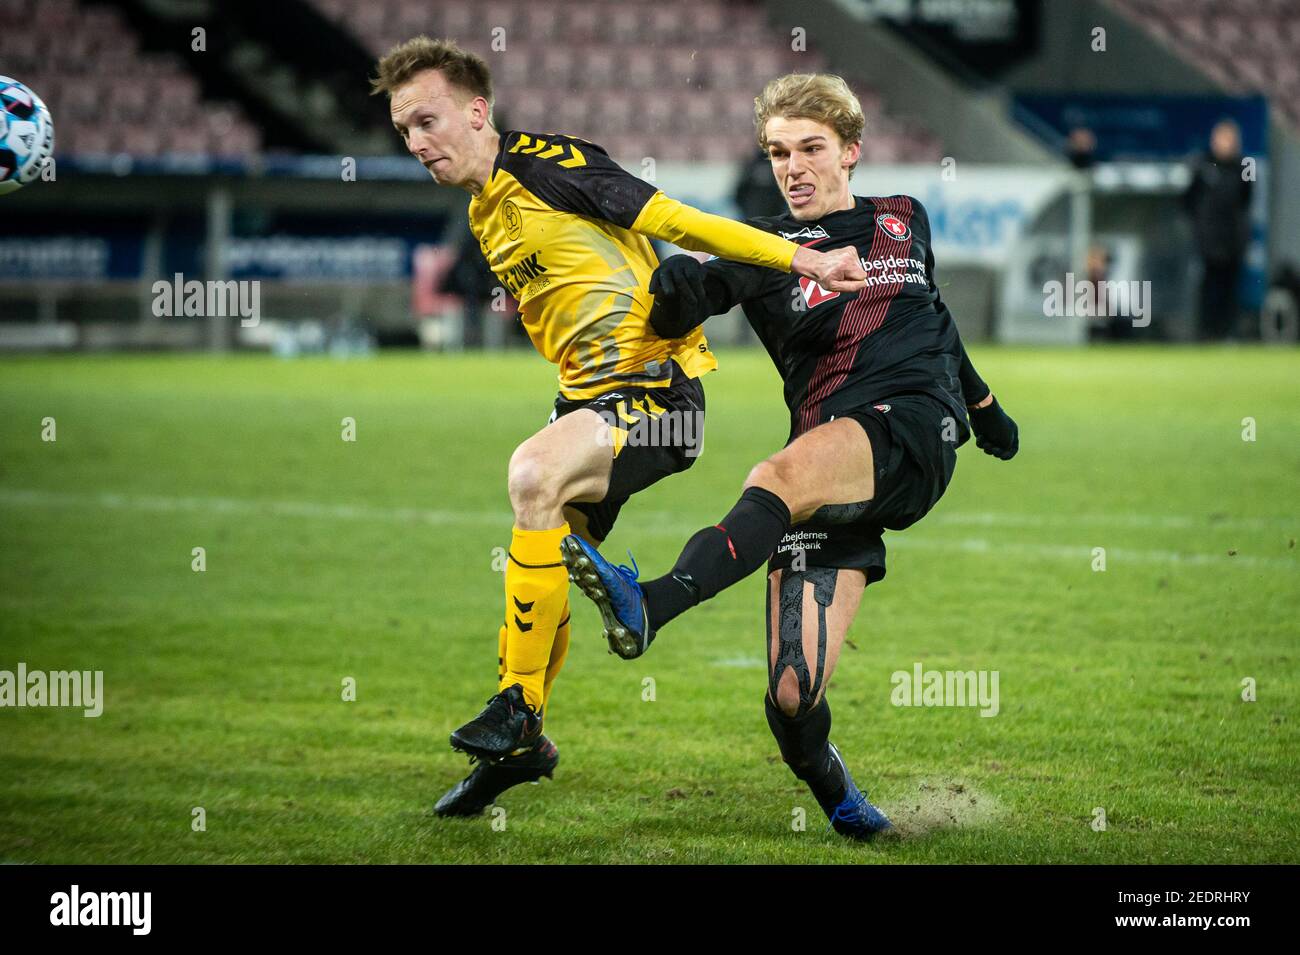 Herning, Denmark. 14th, February 2021. Soren Reese (5) of AC Horsens and Gustav Isaksen of Midtjylland seen during the 3F Superliga match between FC Midtjylland and AC Horsens at MCH Arena